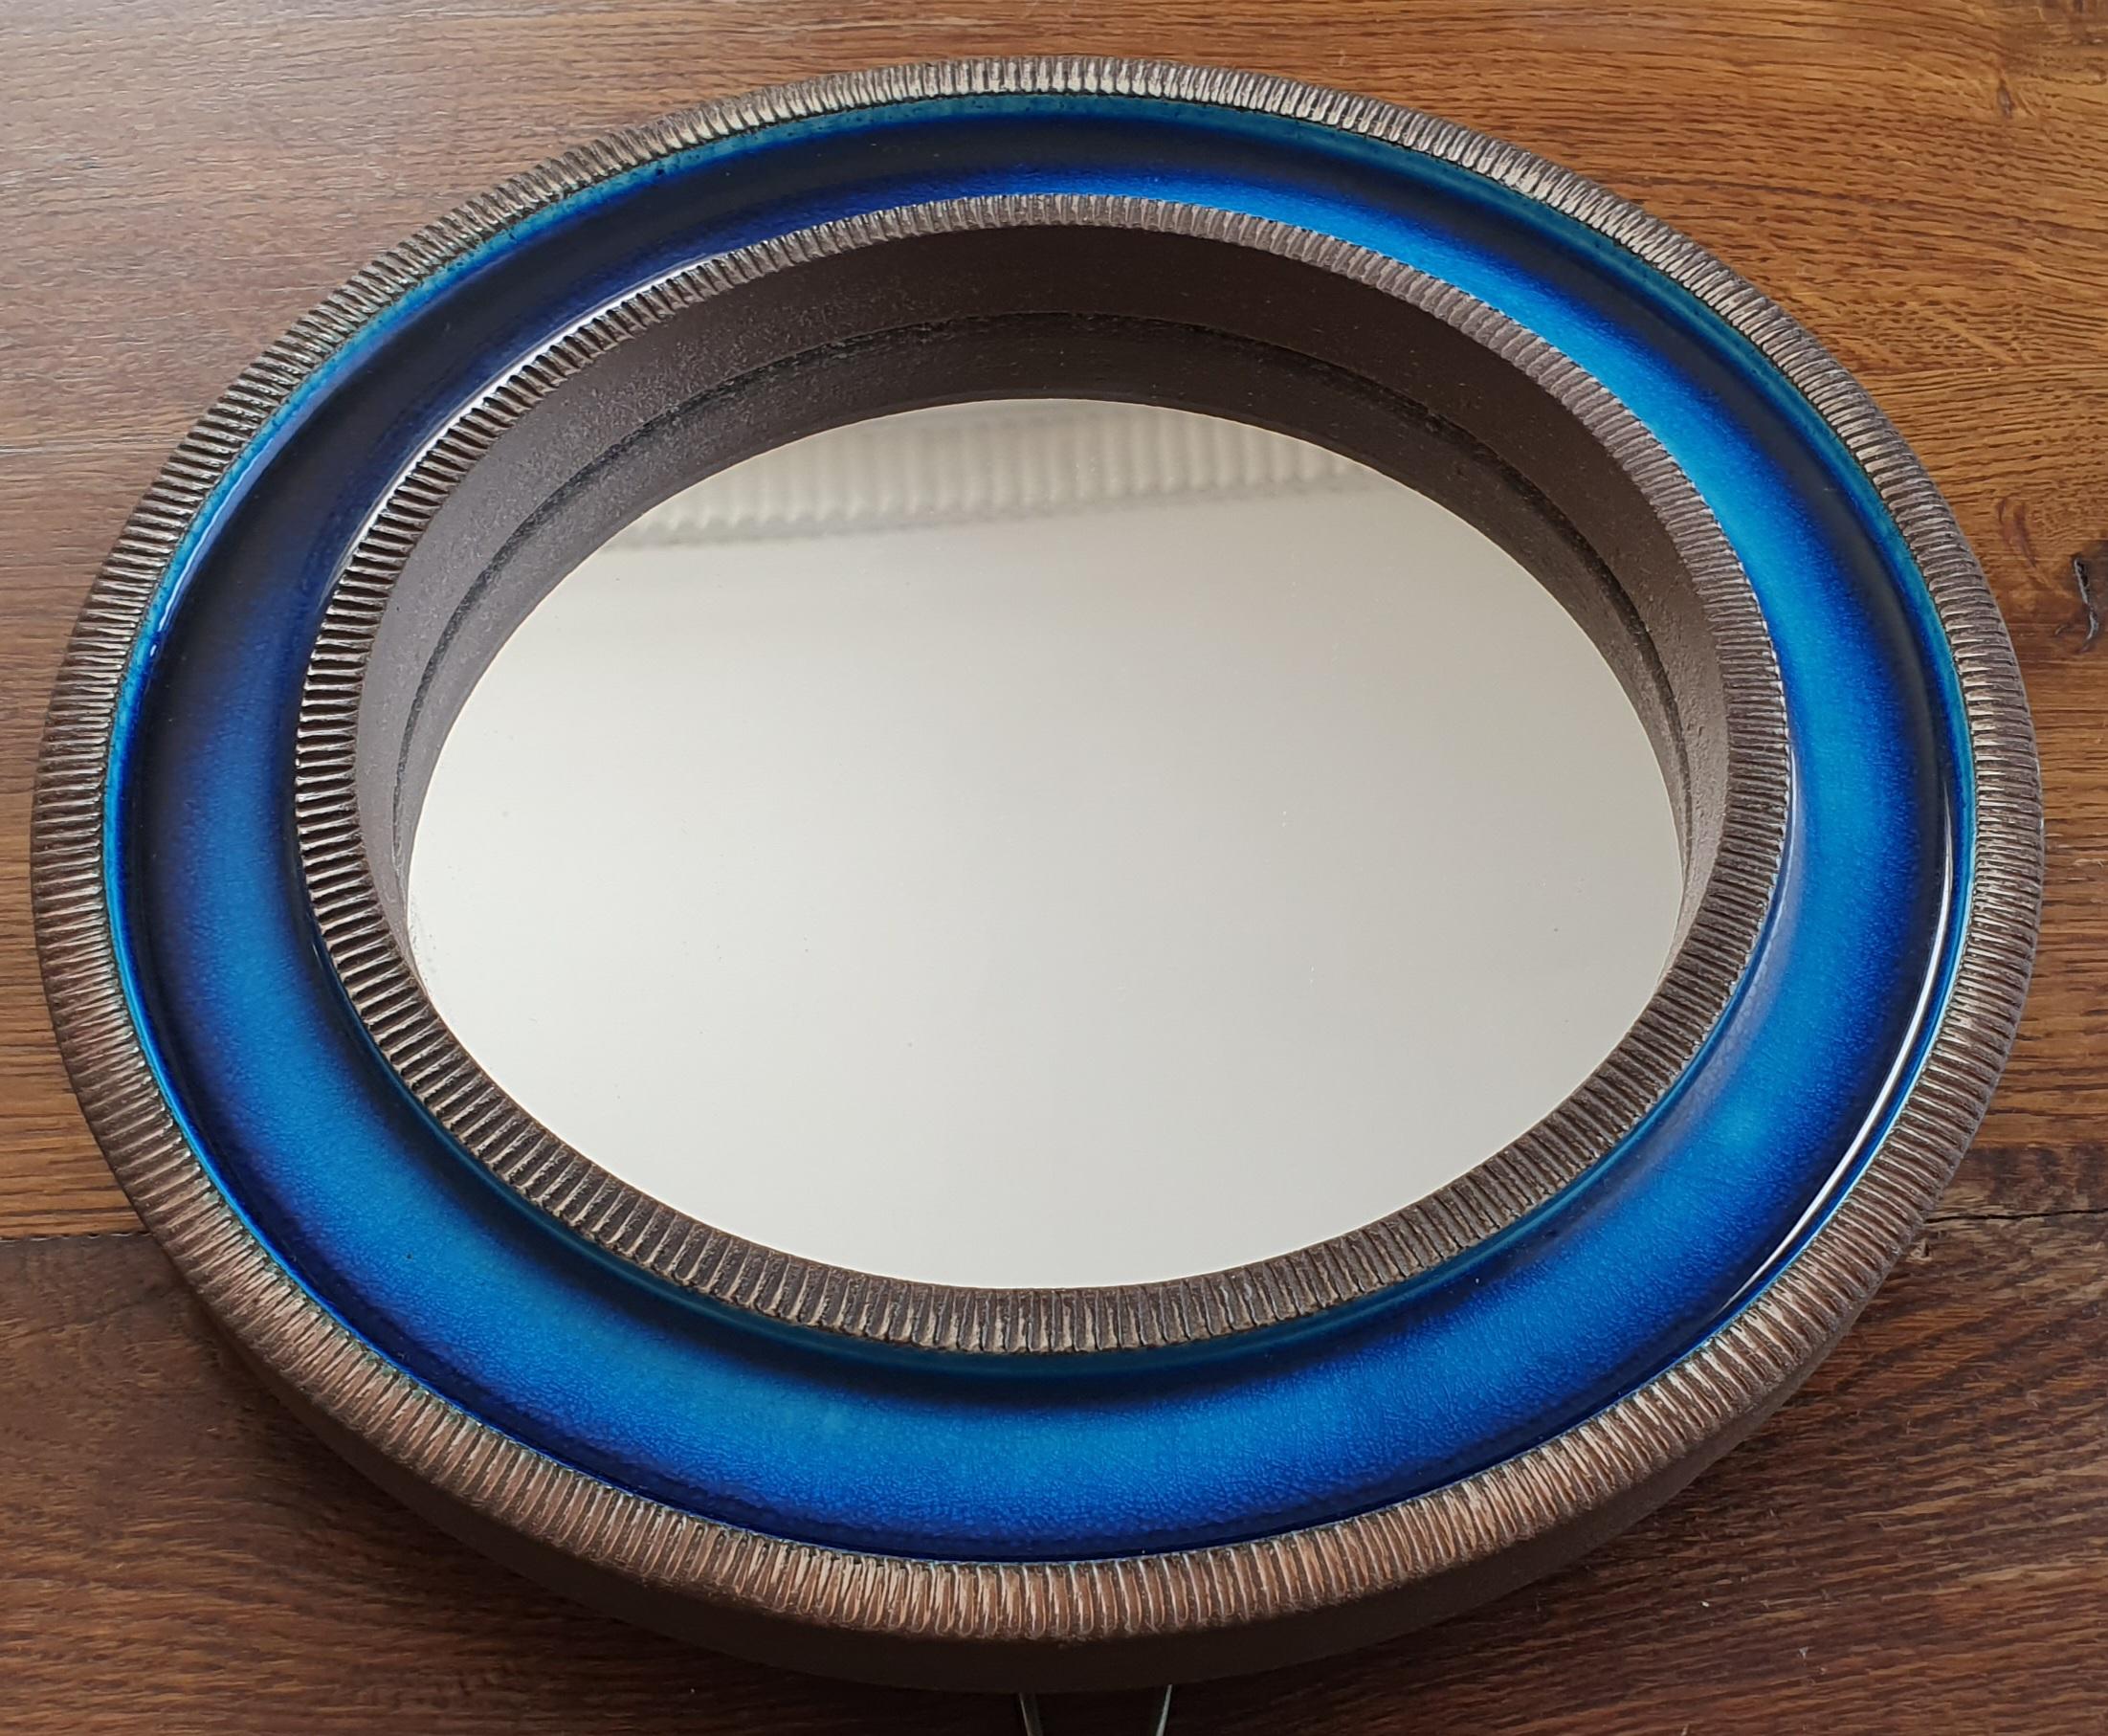 Blue midcentury round ceramic wall mirror designed by Erik Reiff for Danish Knabstrup. The mirror is made of glazed ceramic and has alternating rings with a ceramic ribbed edge and a smooth light blue to dark blue crystalline glaze on the inside.